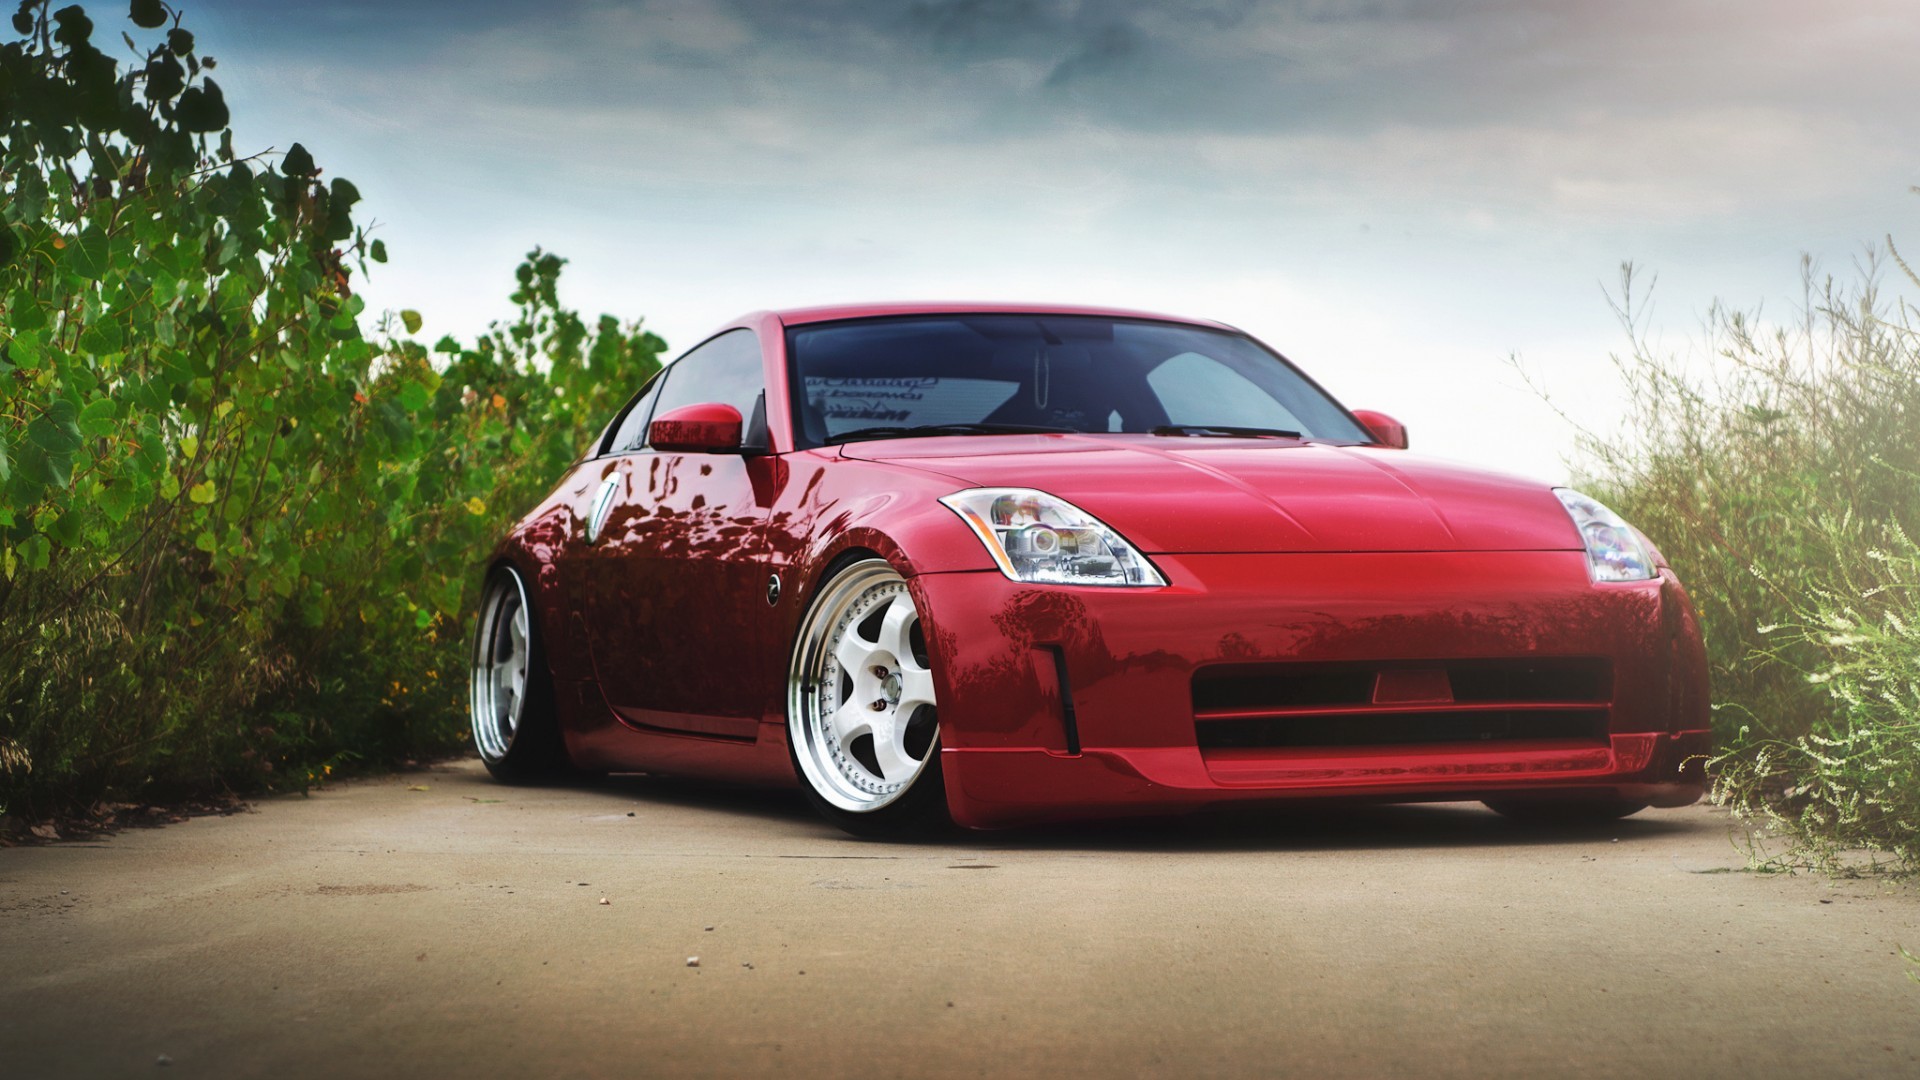 General 1920x1080 car Nissan 350Z Nissan red cars plants vehicle Nissan Fairlady Z Japanese cars